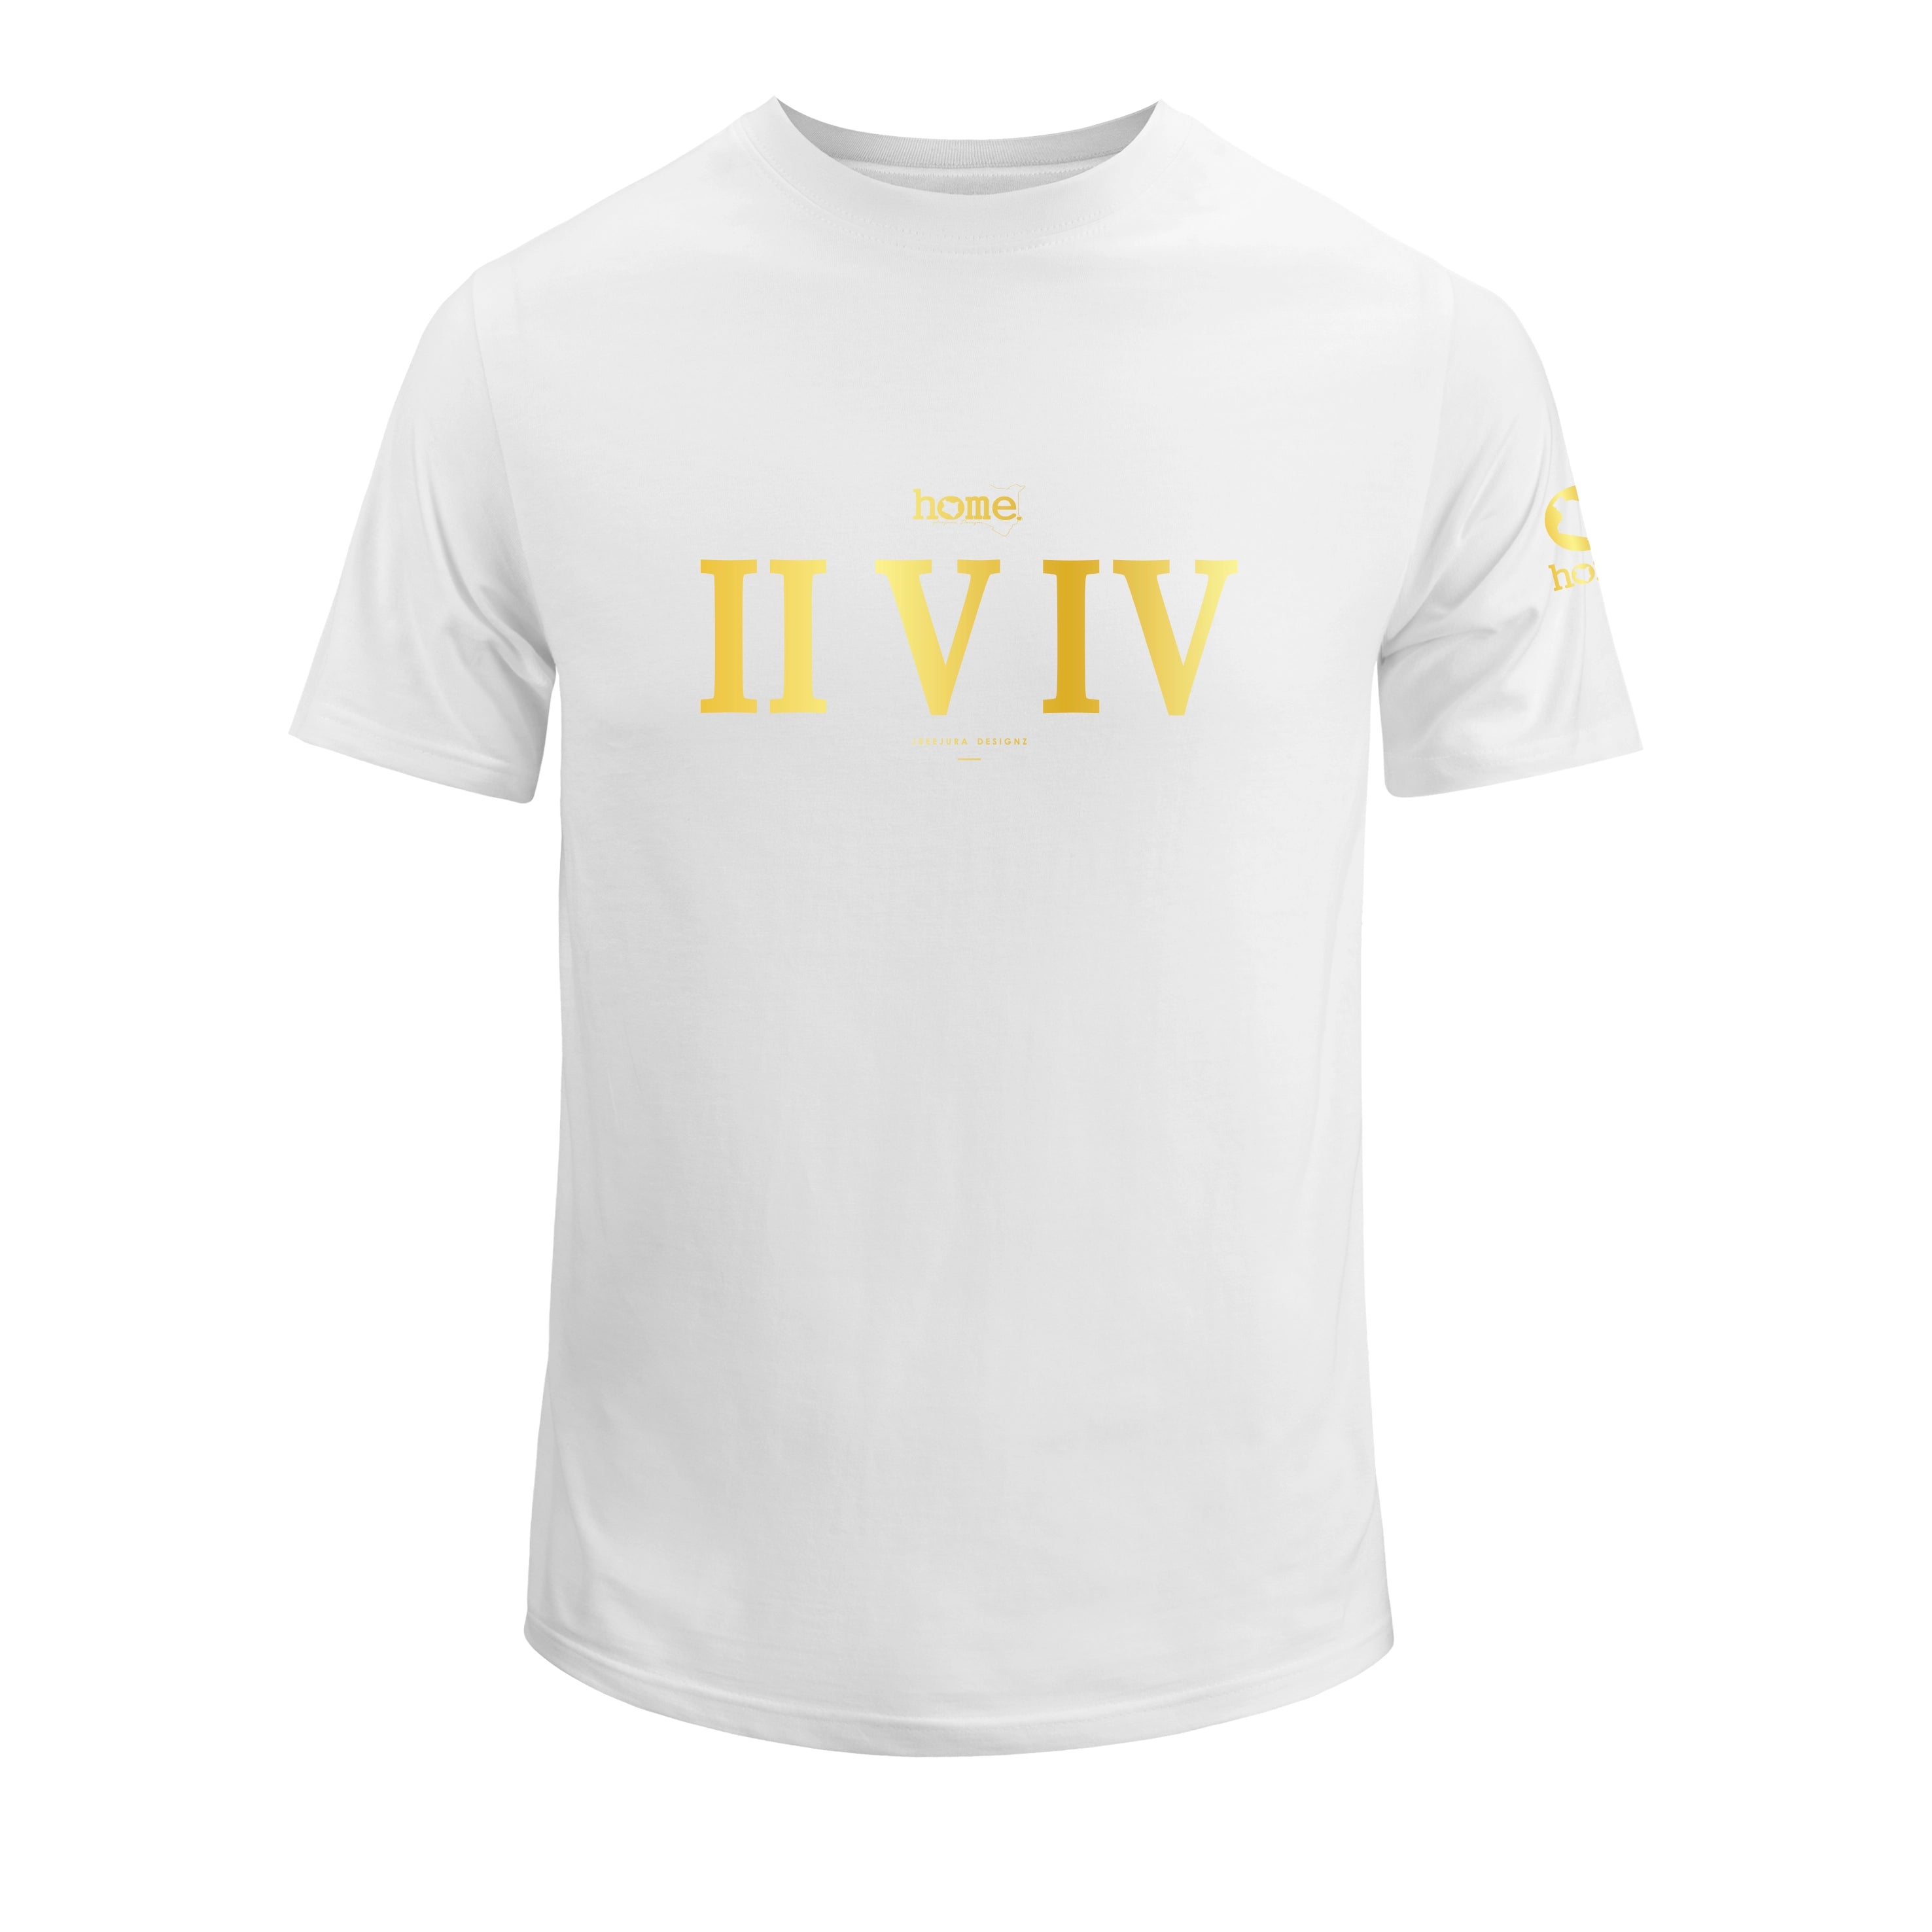 home_254 KIDS SHORT-SLEEVED WHITE T-SHIRT WITH A GOLD ROMAN NUMERALS PRINT – COTTON PLUS FABRIC